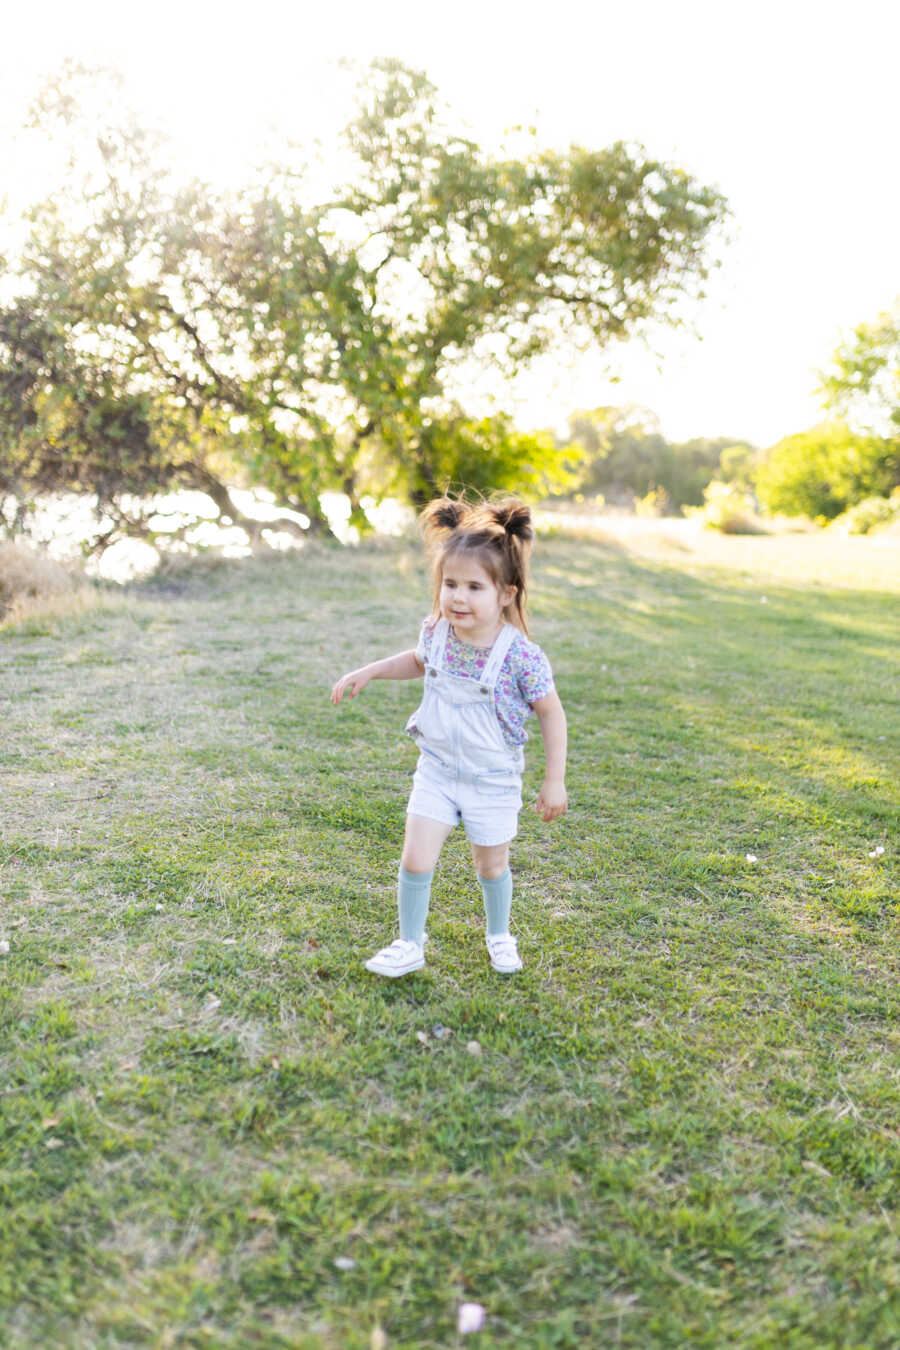 Young girl with genetic disorder walks through a field 